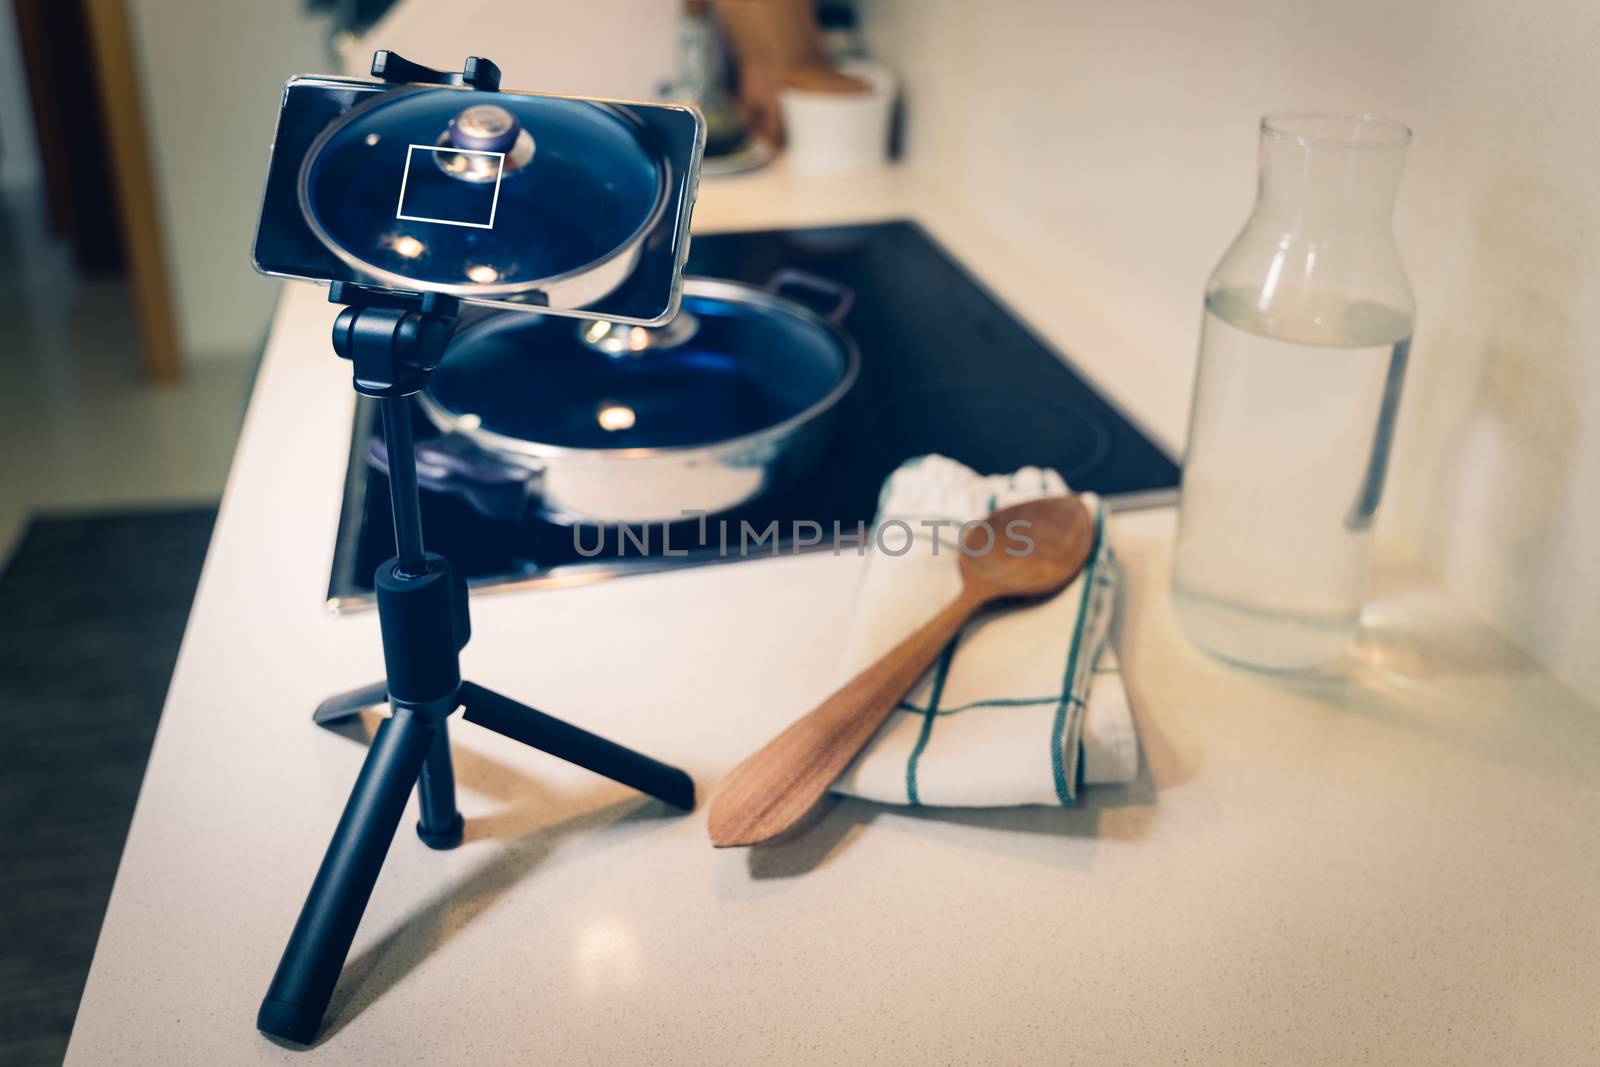 Smart phone camera on a tripod, food blogger real studio set by tanaonte